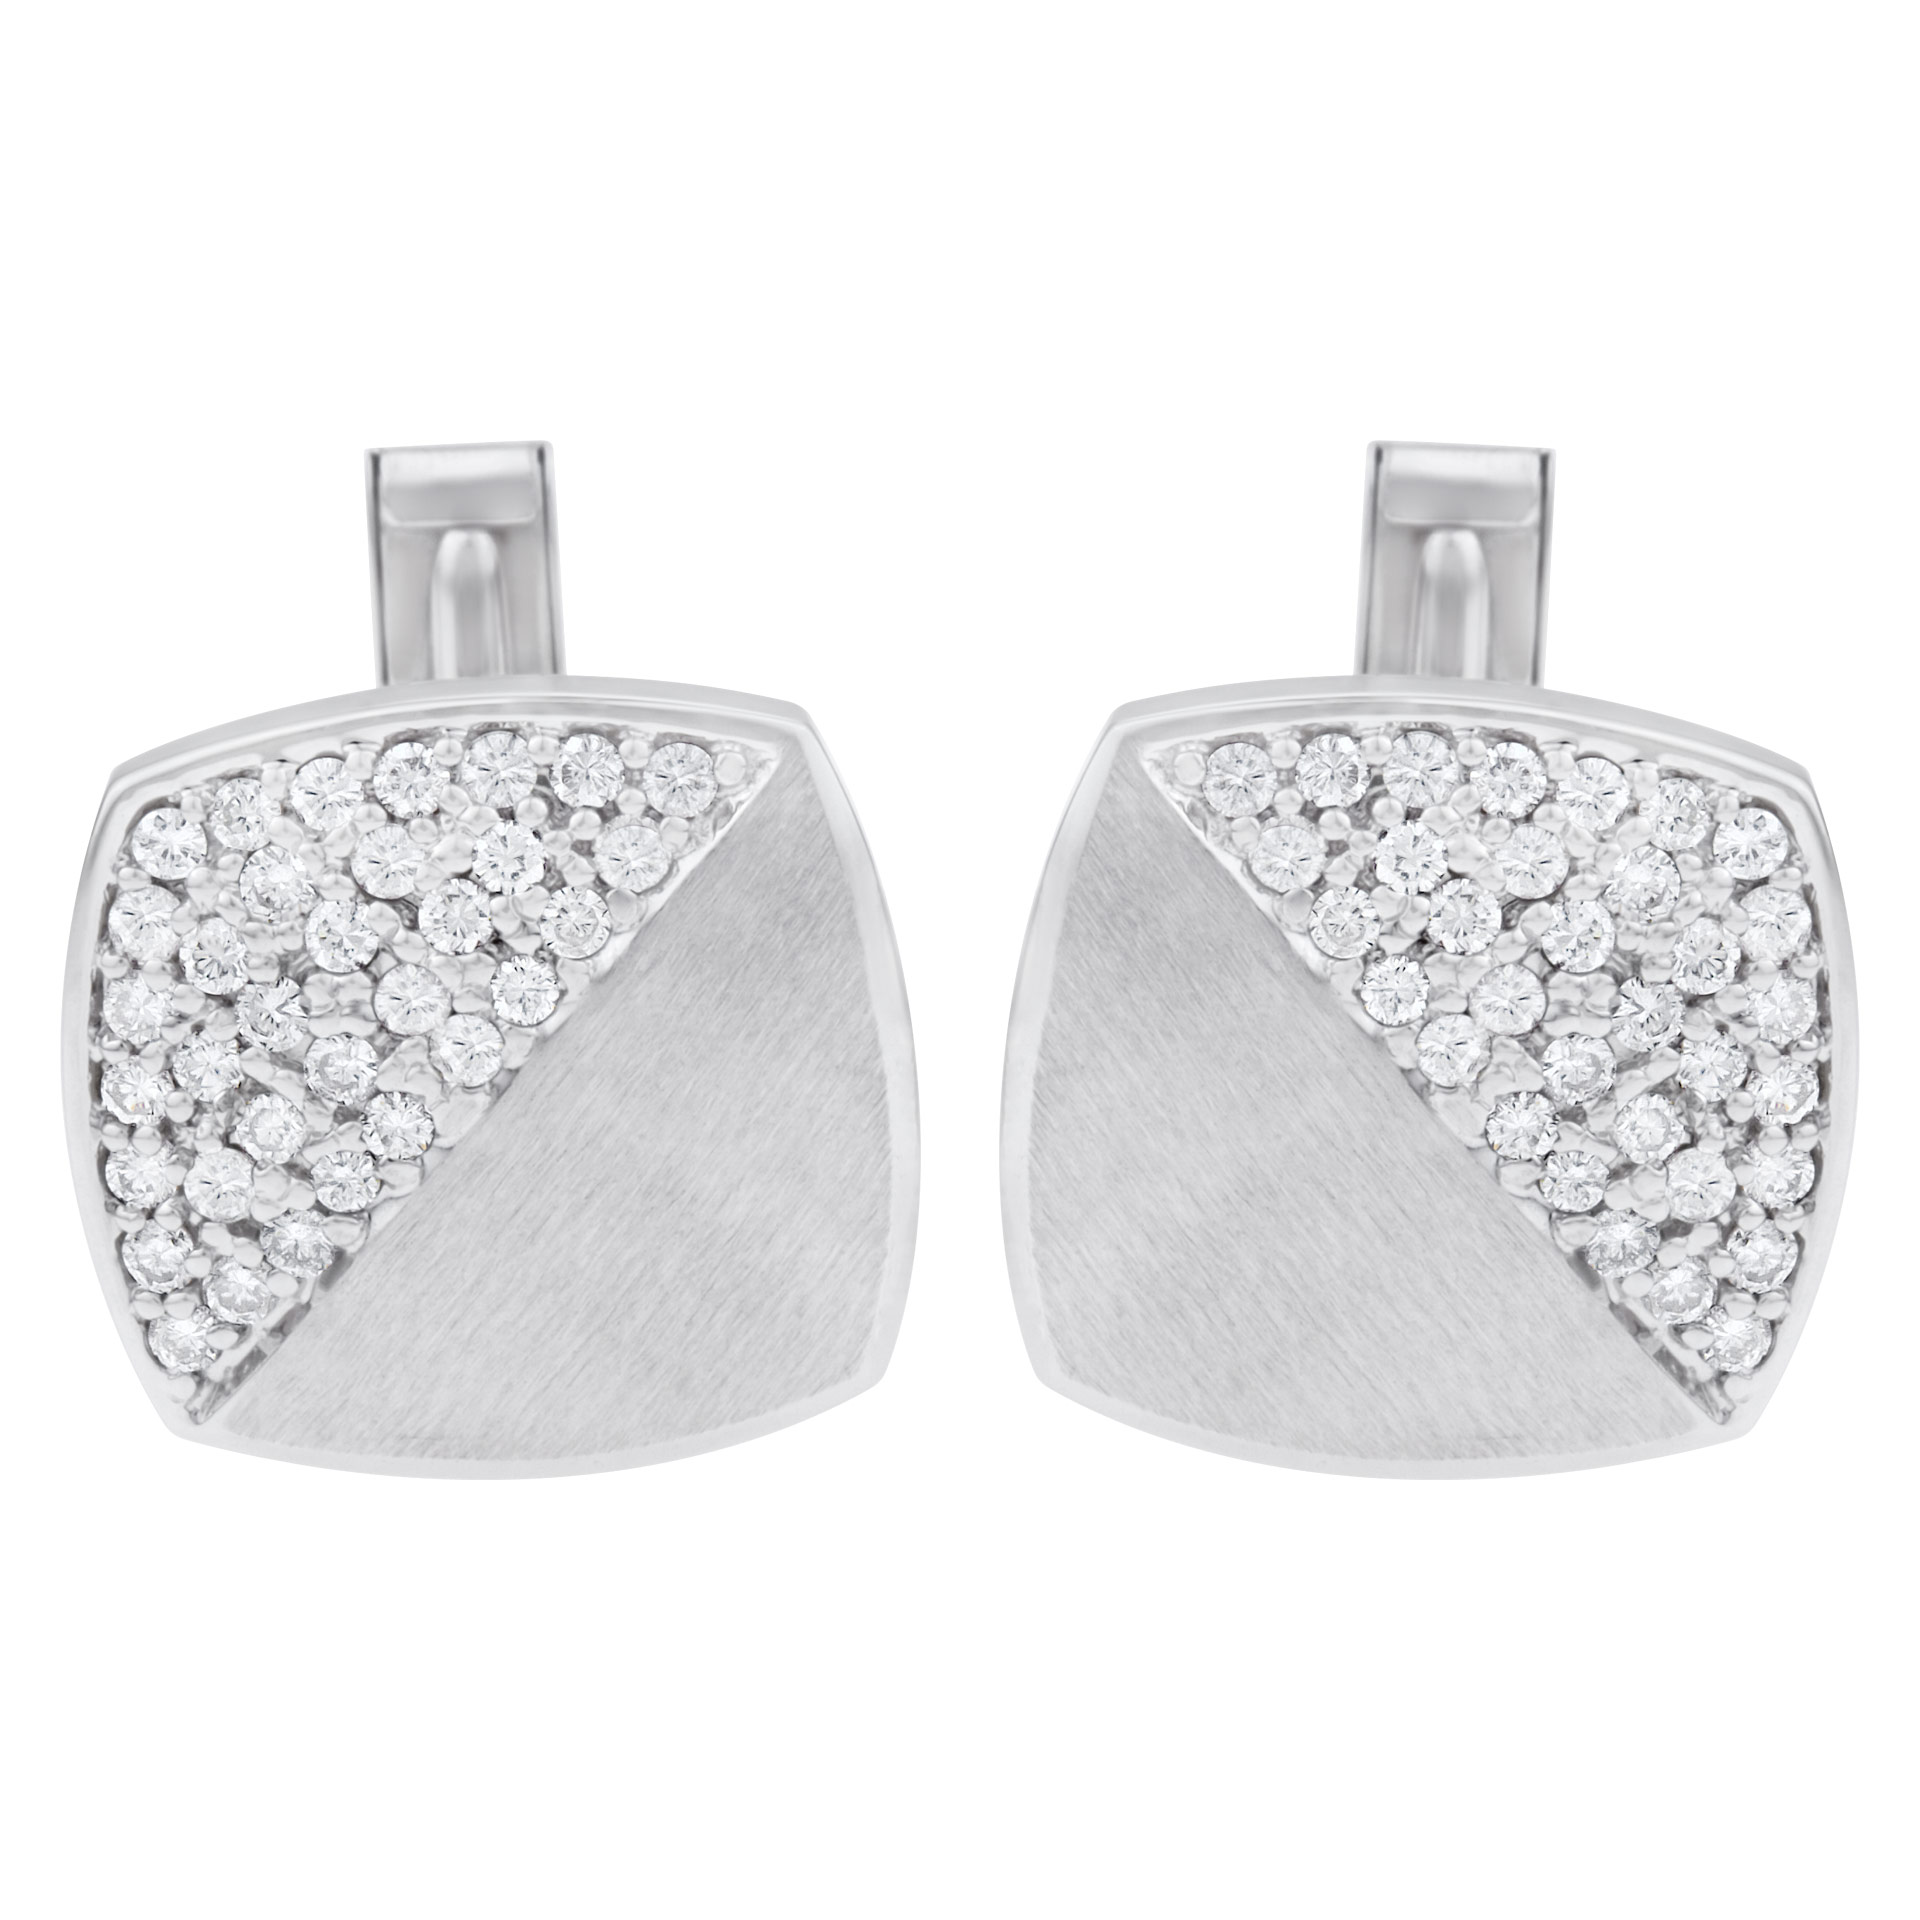 New square 18k white gold cufflinks with pave set diamonds